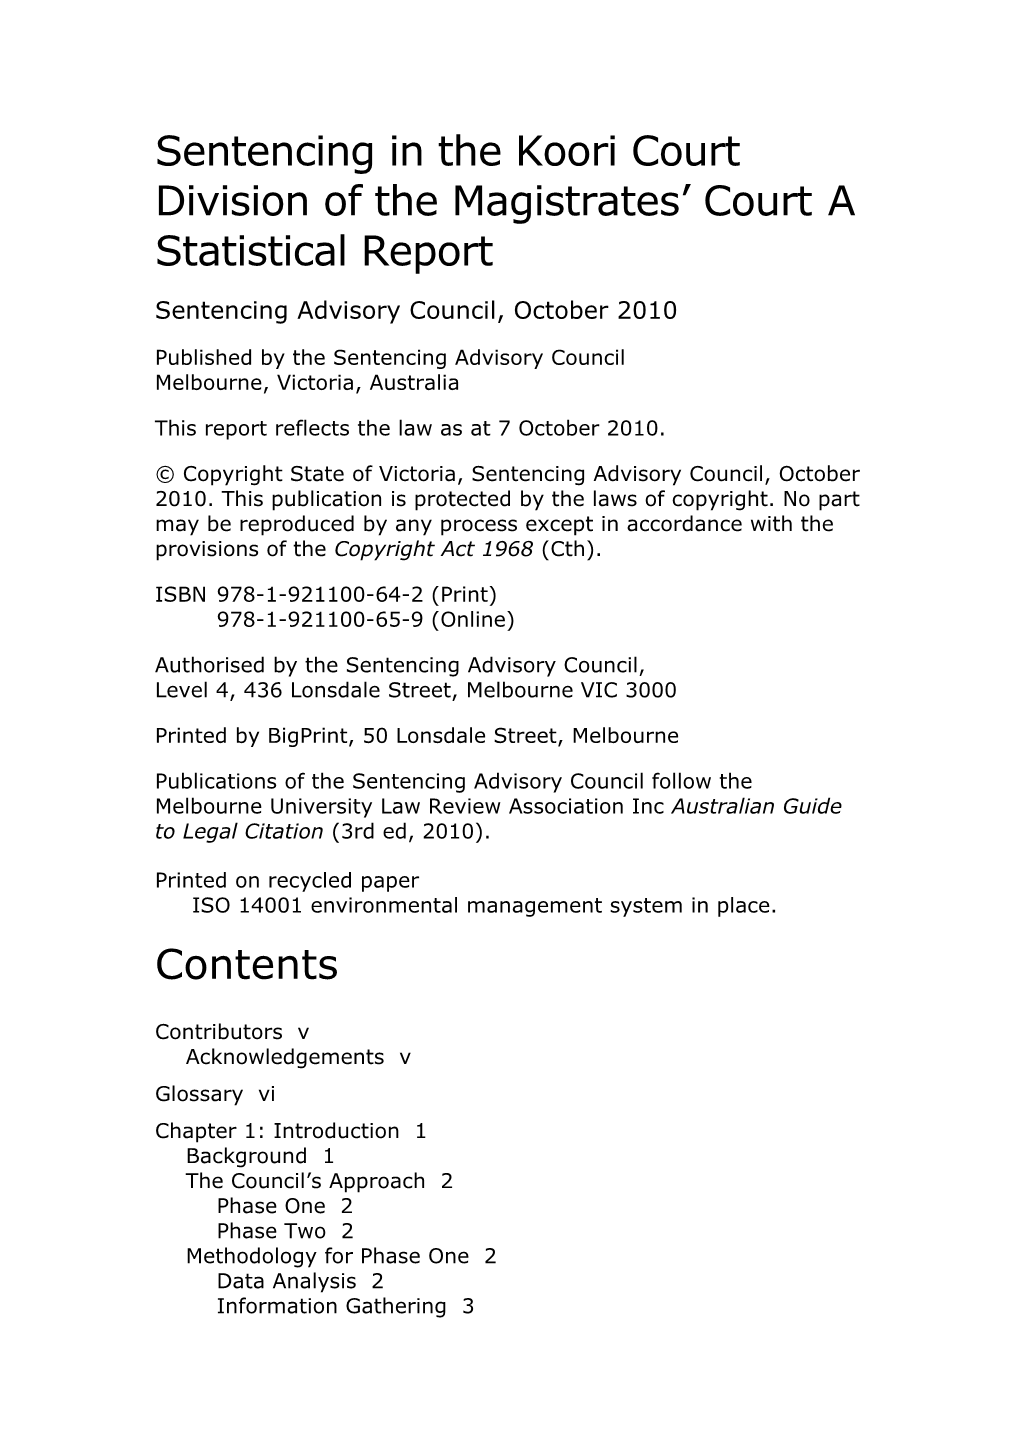 Sentencing in the Koori Court Division of the Magistrates Court a Statistical Report